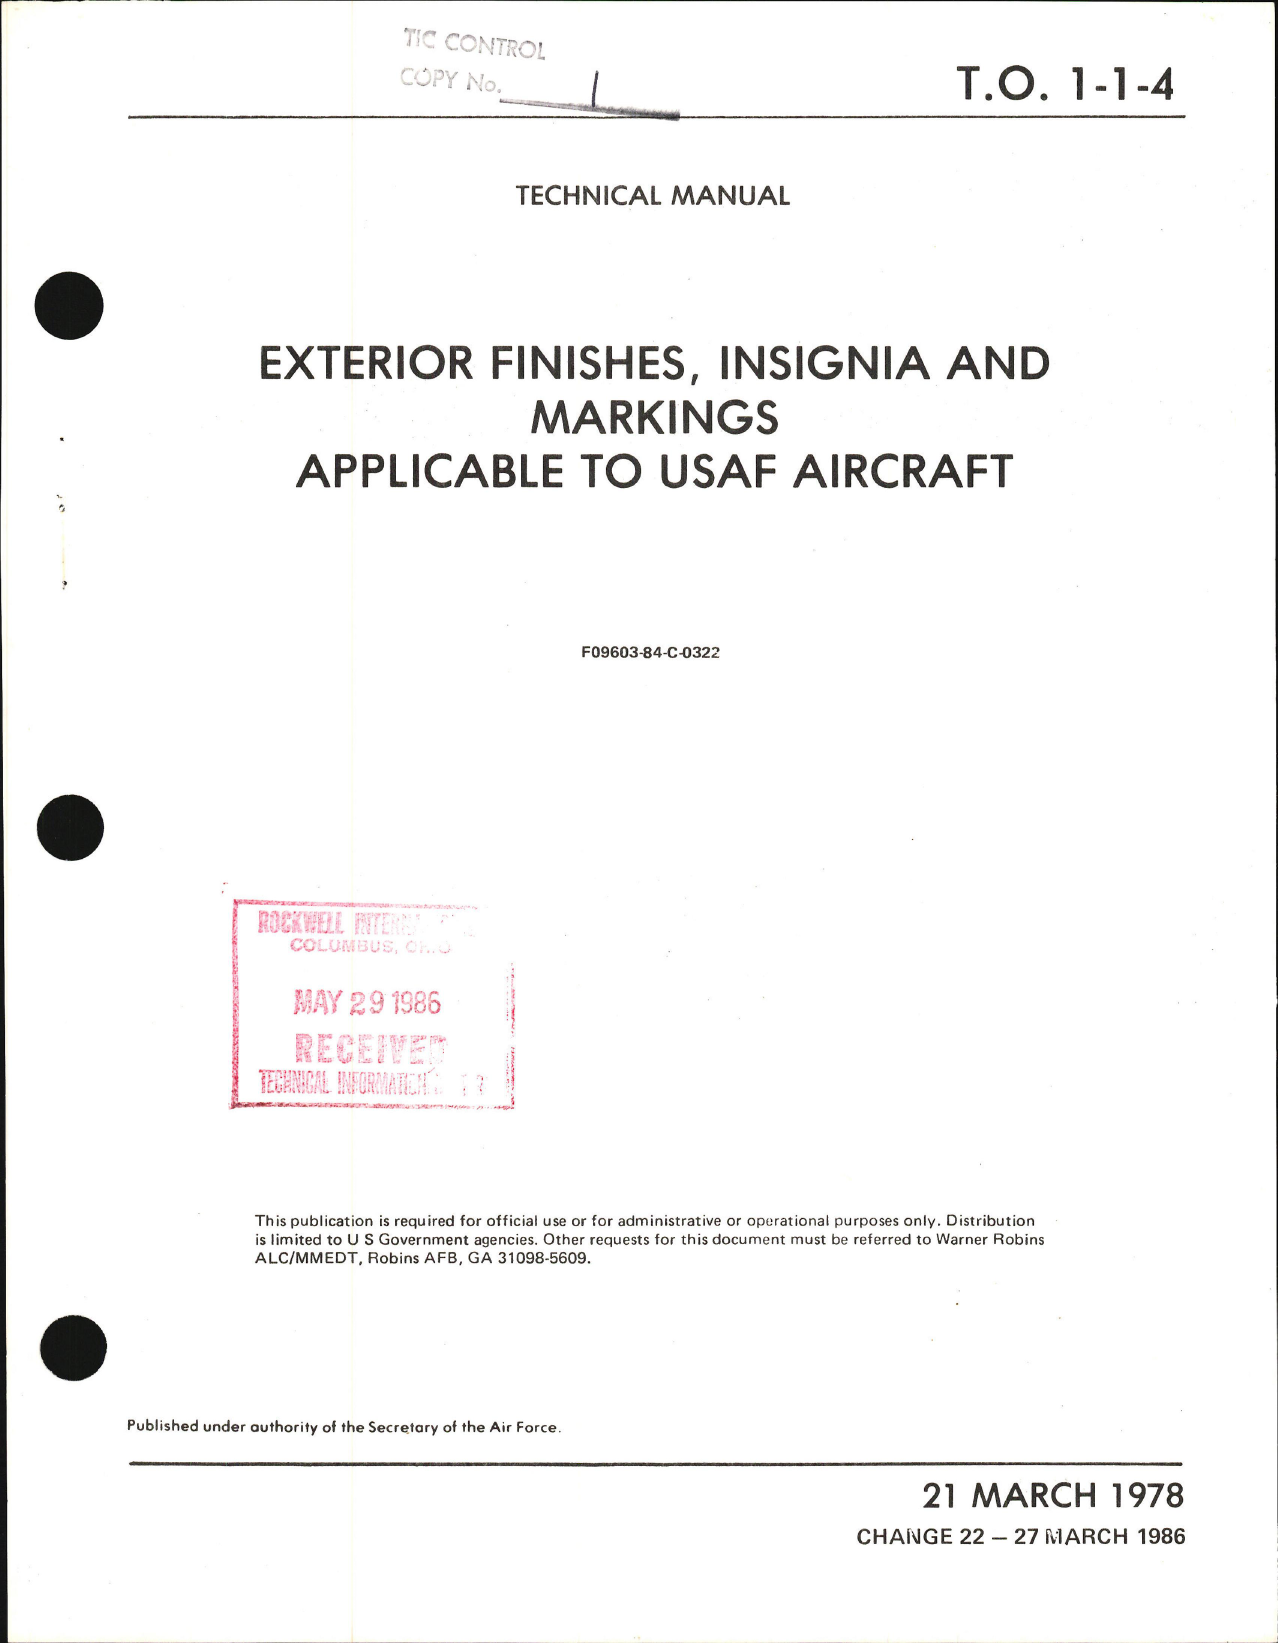 Sample page 1 from AirCorps Library document: Exterior Finishes, Insignia and Markings for USAF Aircraft - Change - 22